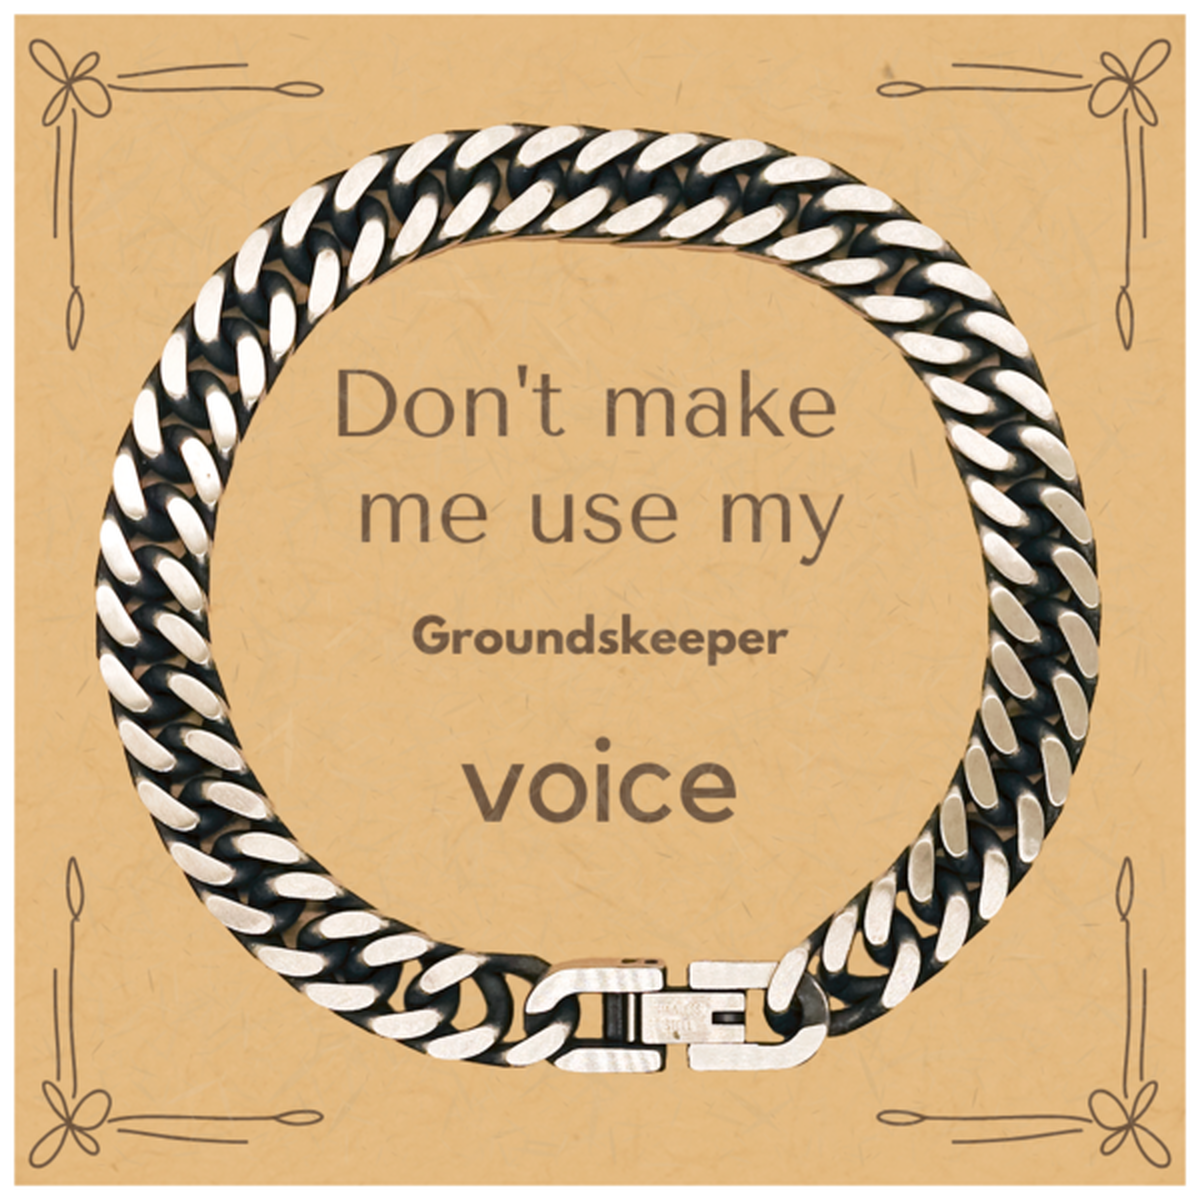 Don't make me use my Groundskeeper voice, Sarcasm Groundskeeper Card Gifts, Christmas Groundskeeper Cuban Link Chain Bracelet Birthday Unique Gifts For Groundskeeper Coworkers, Men, Women, Colleague, Friends